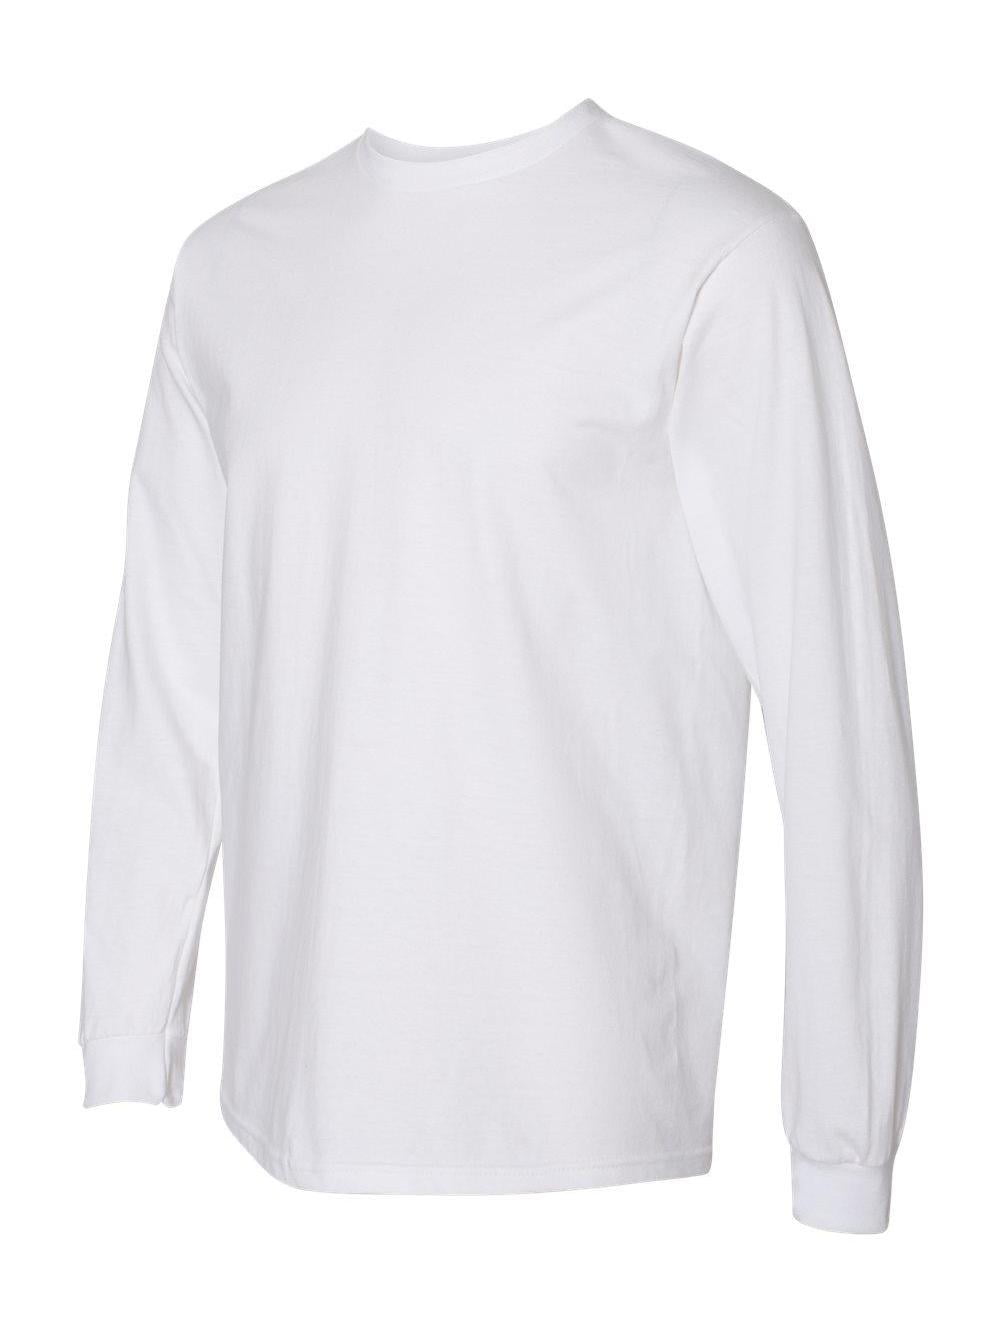 sizes Small to 3XL Details about   Hanes X-Temp Men's Tagless Thermal long sleeve Crew shirt 